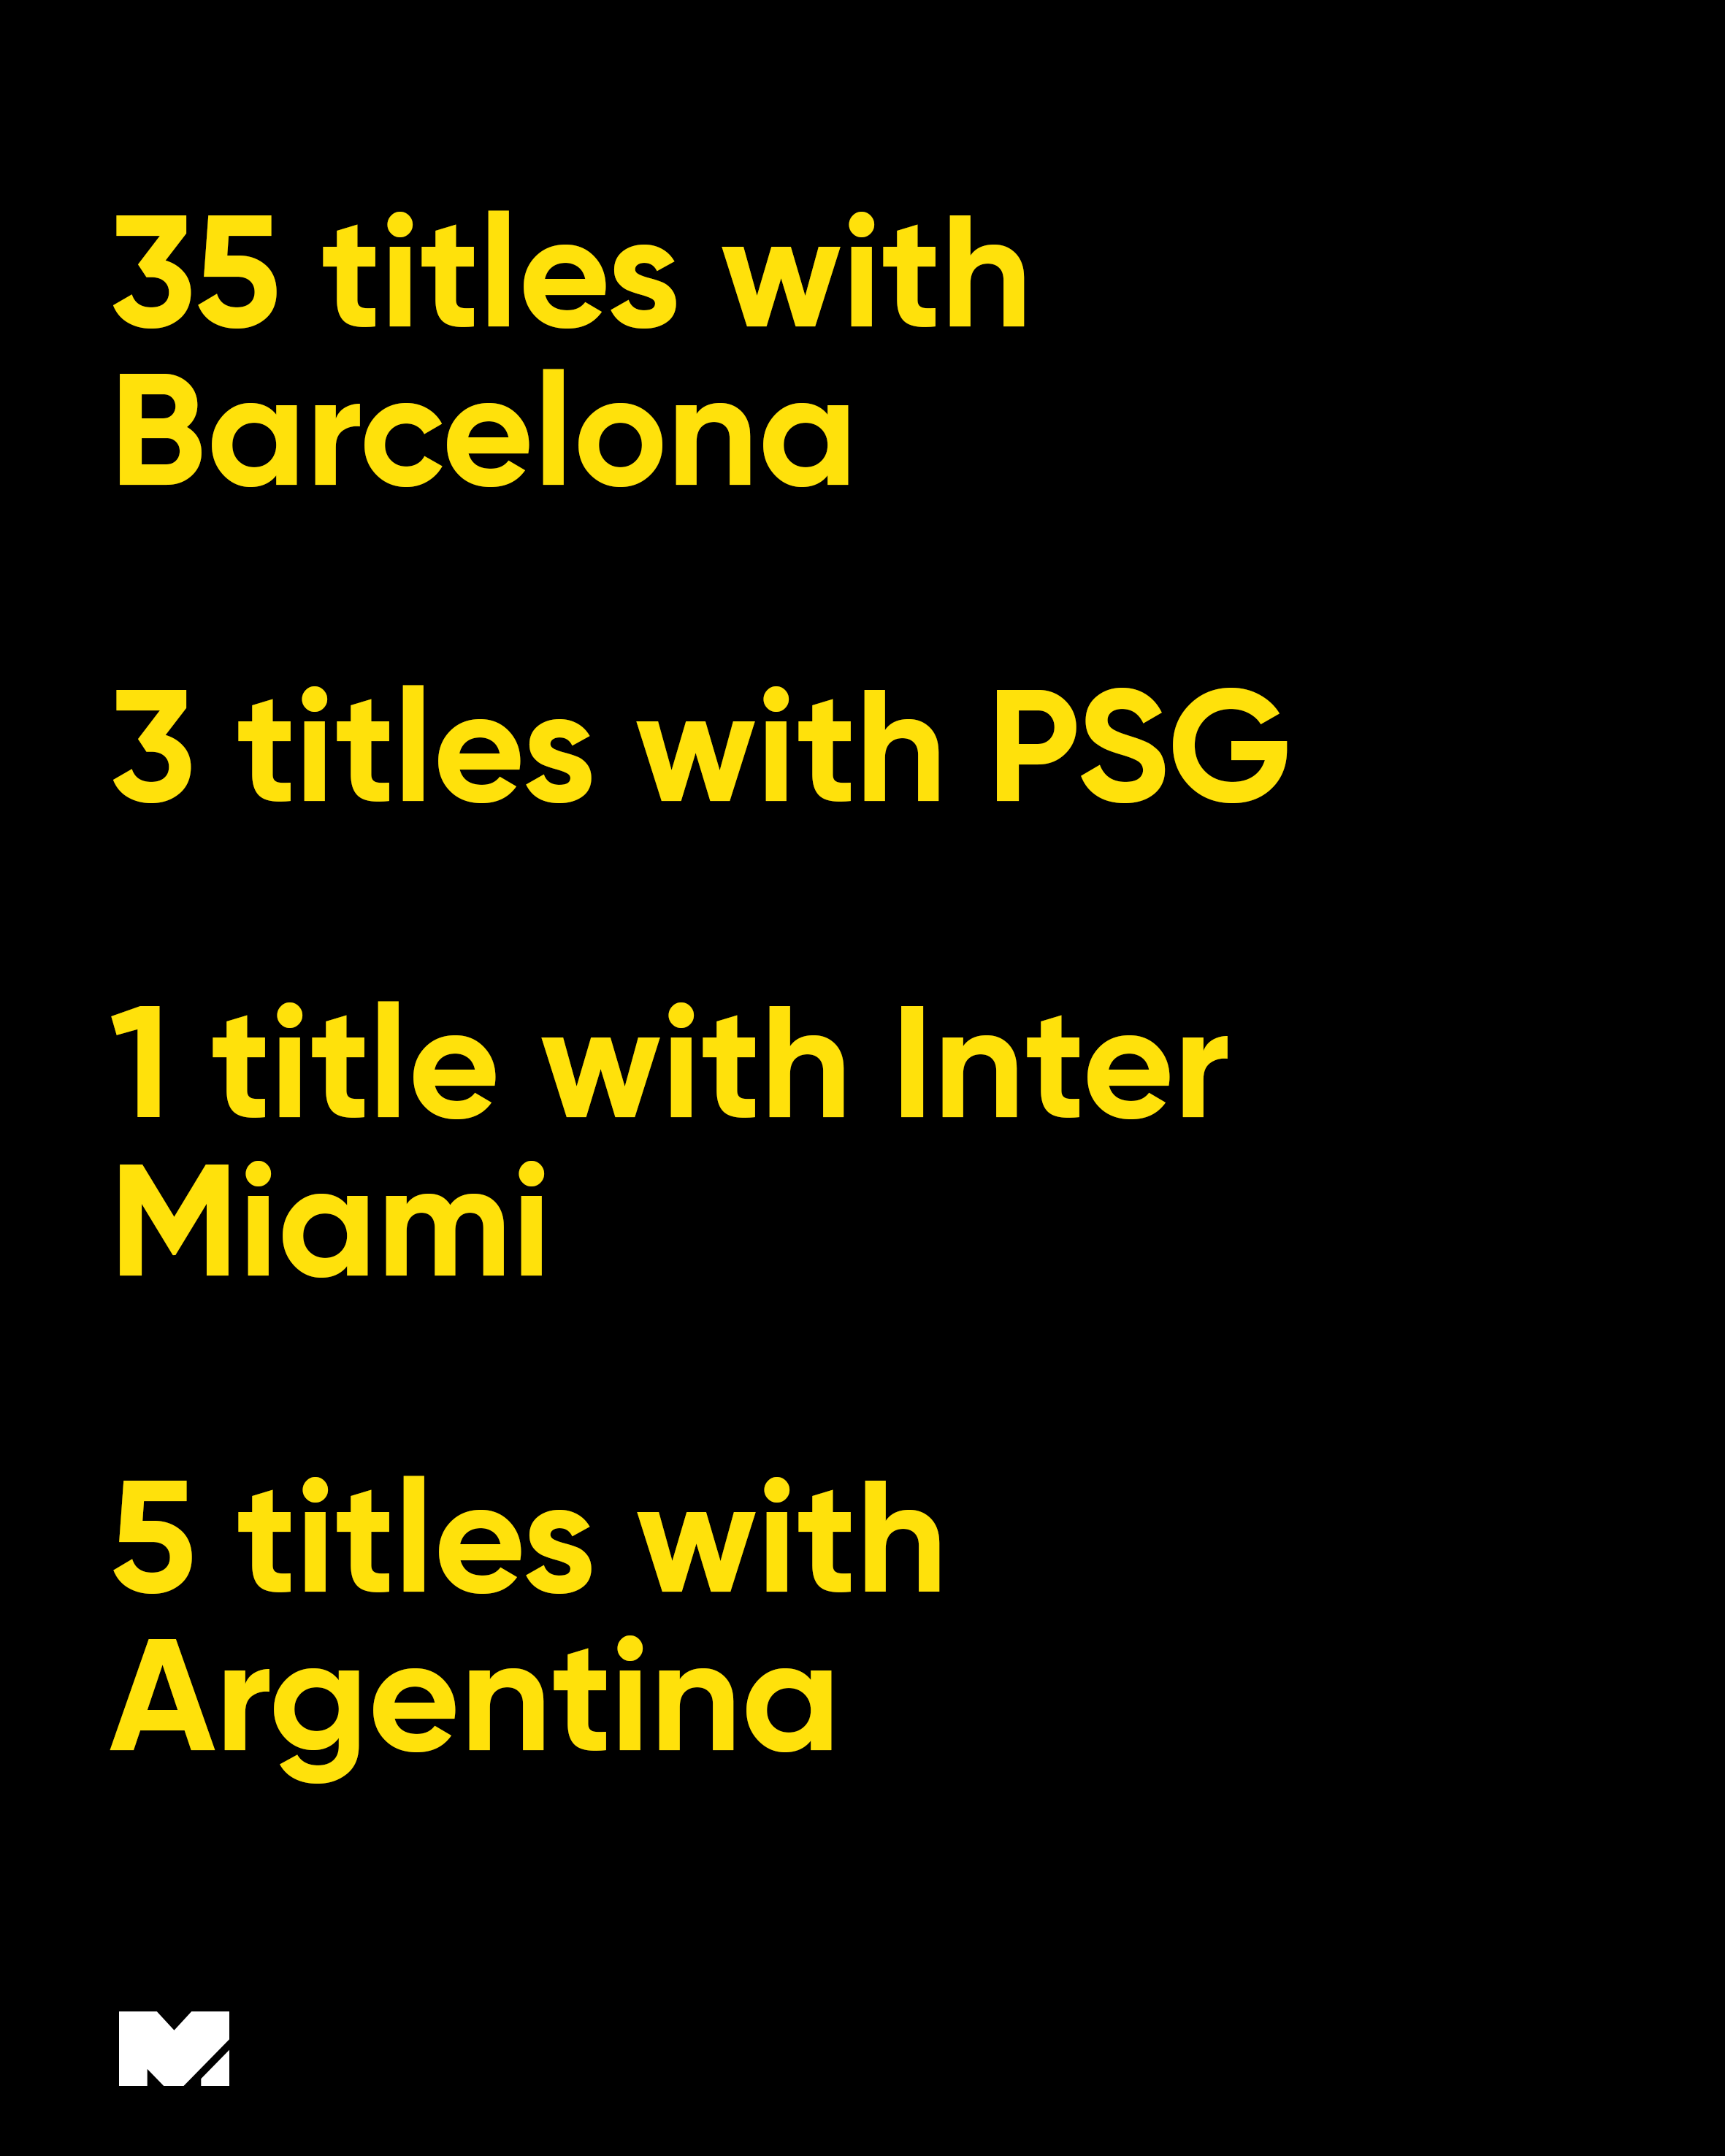 Lionel Messi becomes the Most Decorated Player in Football History with 44 Titles